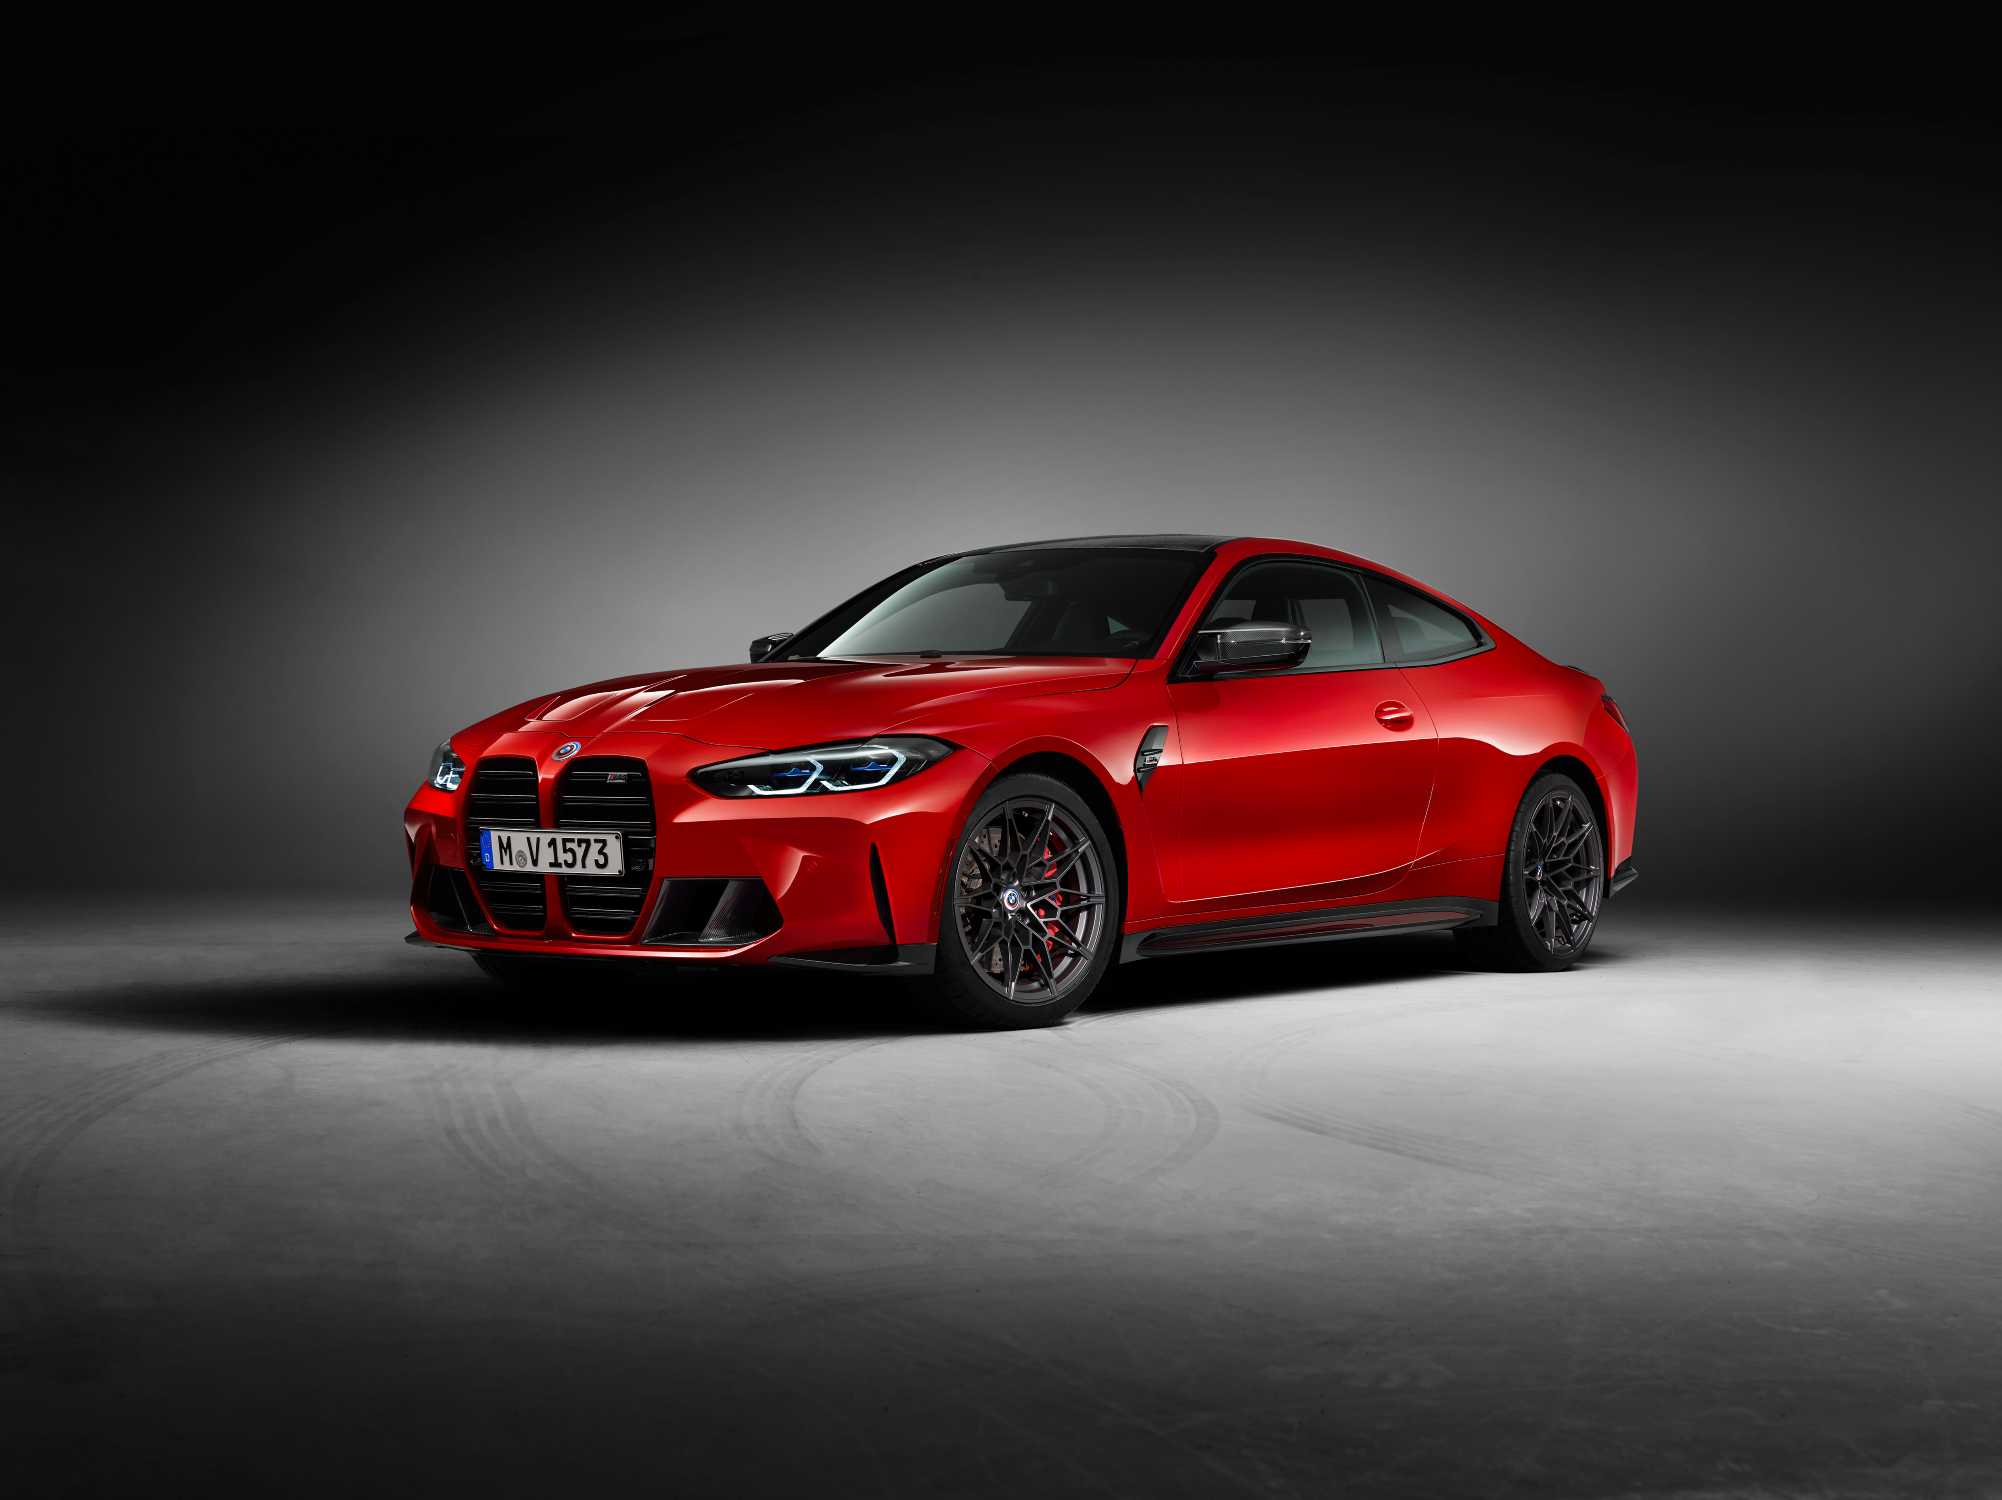 50 Jahre BMW M: The BMW M3 and BMW M4 edition models marking the company's  anniversary.